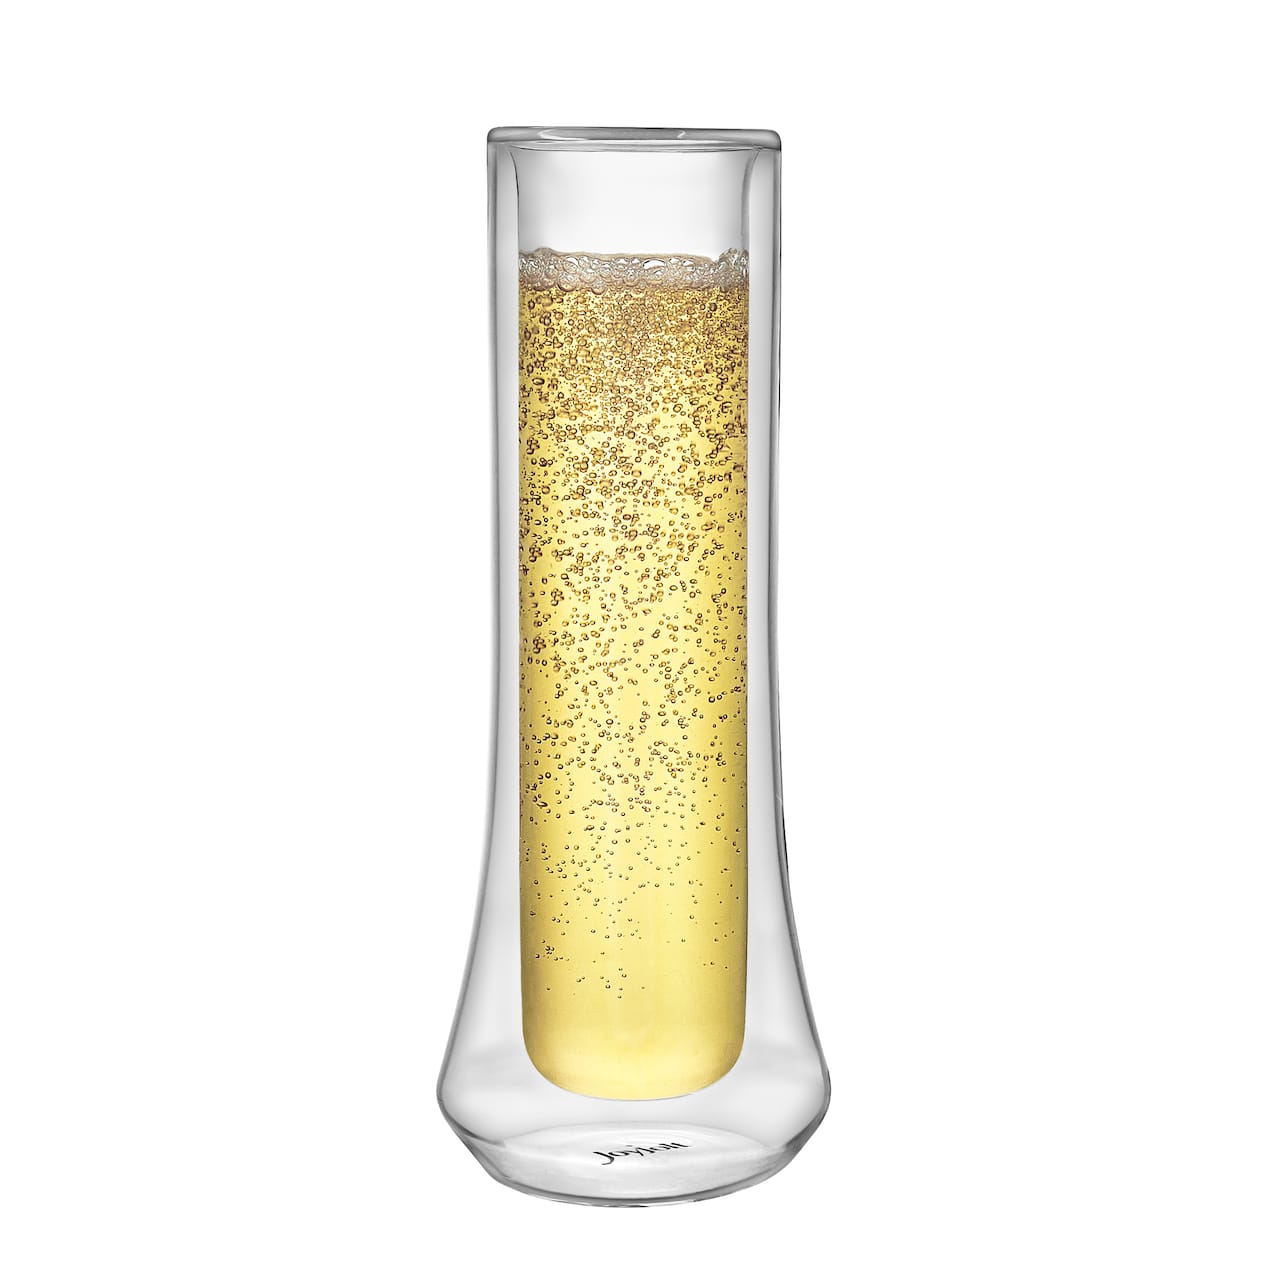 JoyJolt® Cosmo Double Wall Stemless Champagne Flute Glasses, 4ct